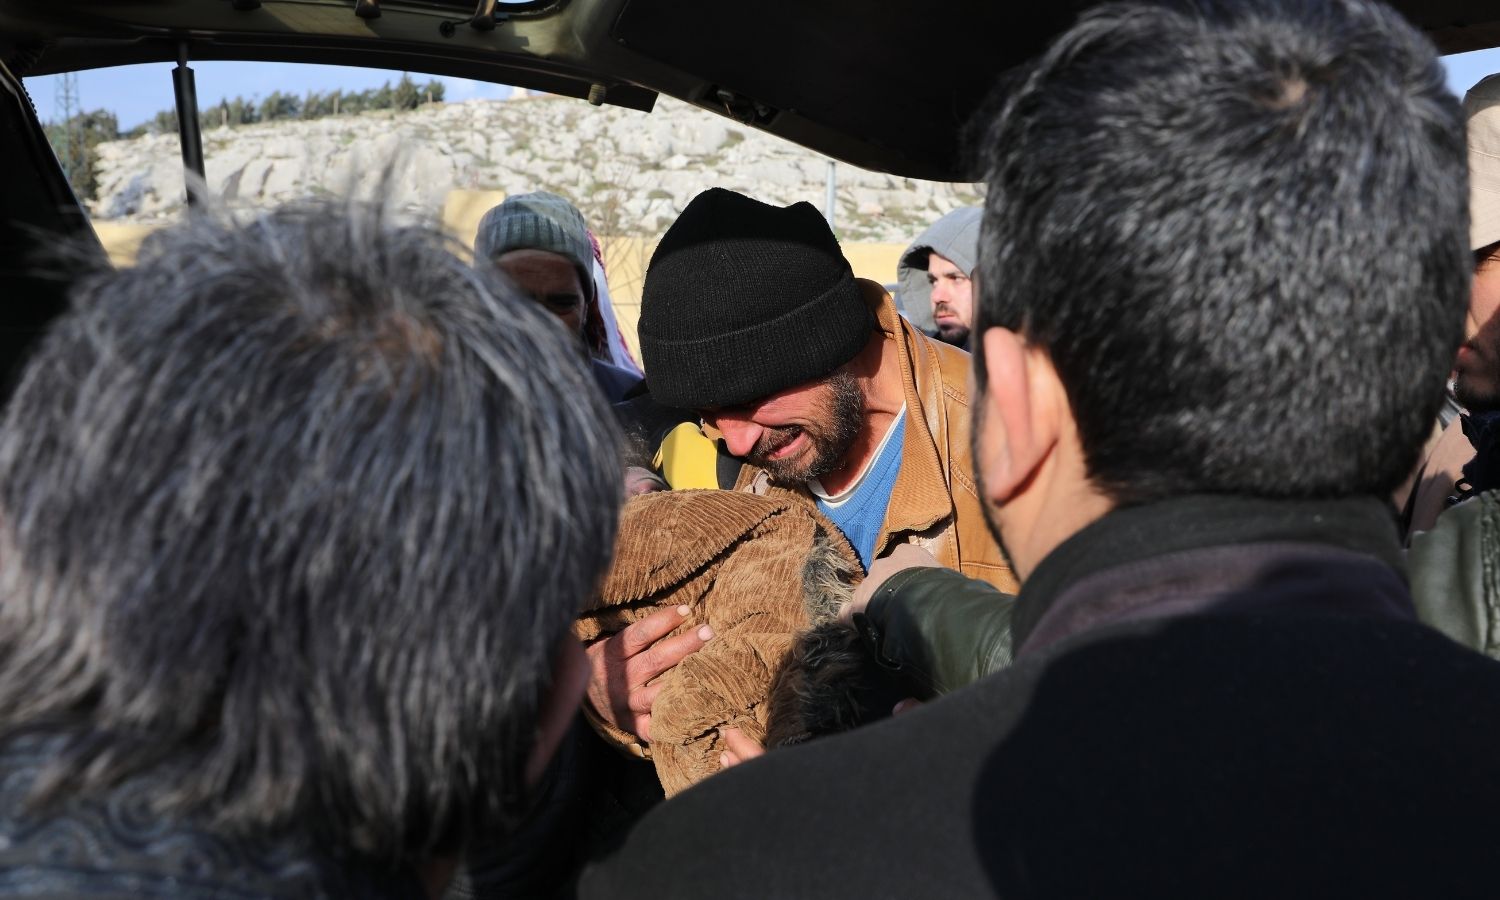 Bodies of earthquake victims in Turkey brought back to northern Syria for burial - February 7, 2023 (Bab al-Hawa crossing)